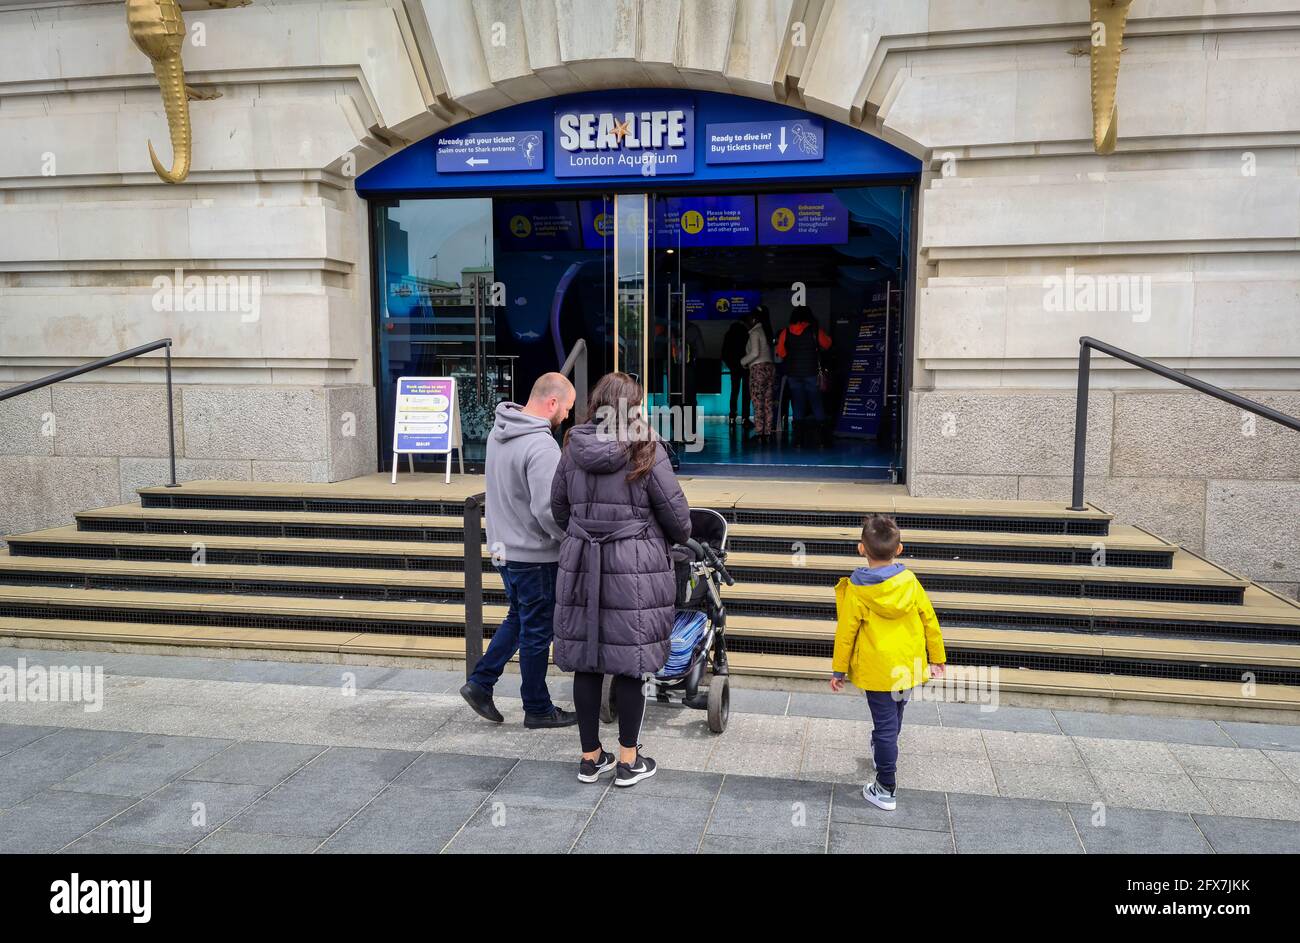 London. UK- 05.23.2021. The main entrance of the popular attraction Sea Life London Aquarium with visitors entering to purchase tickets . Stock Photo